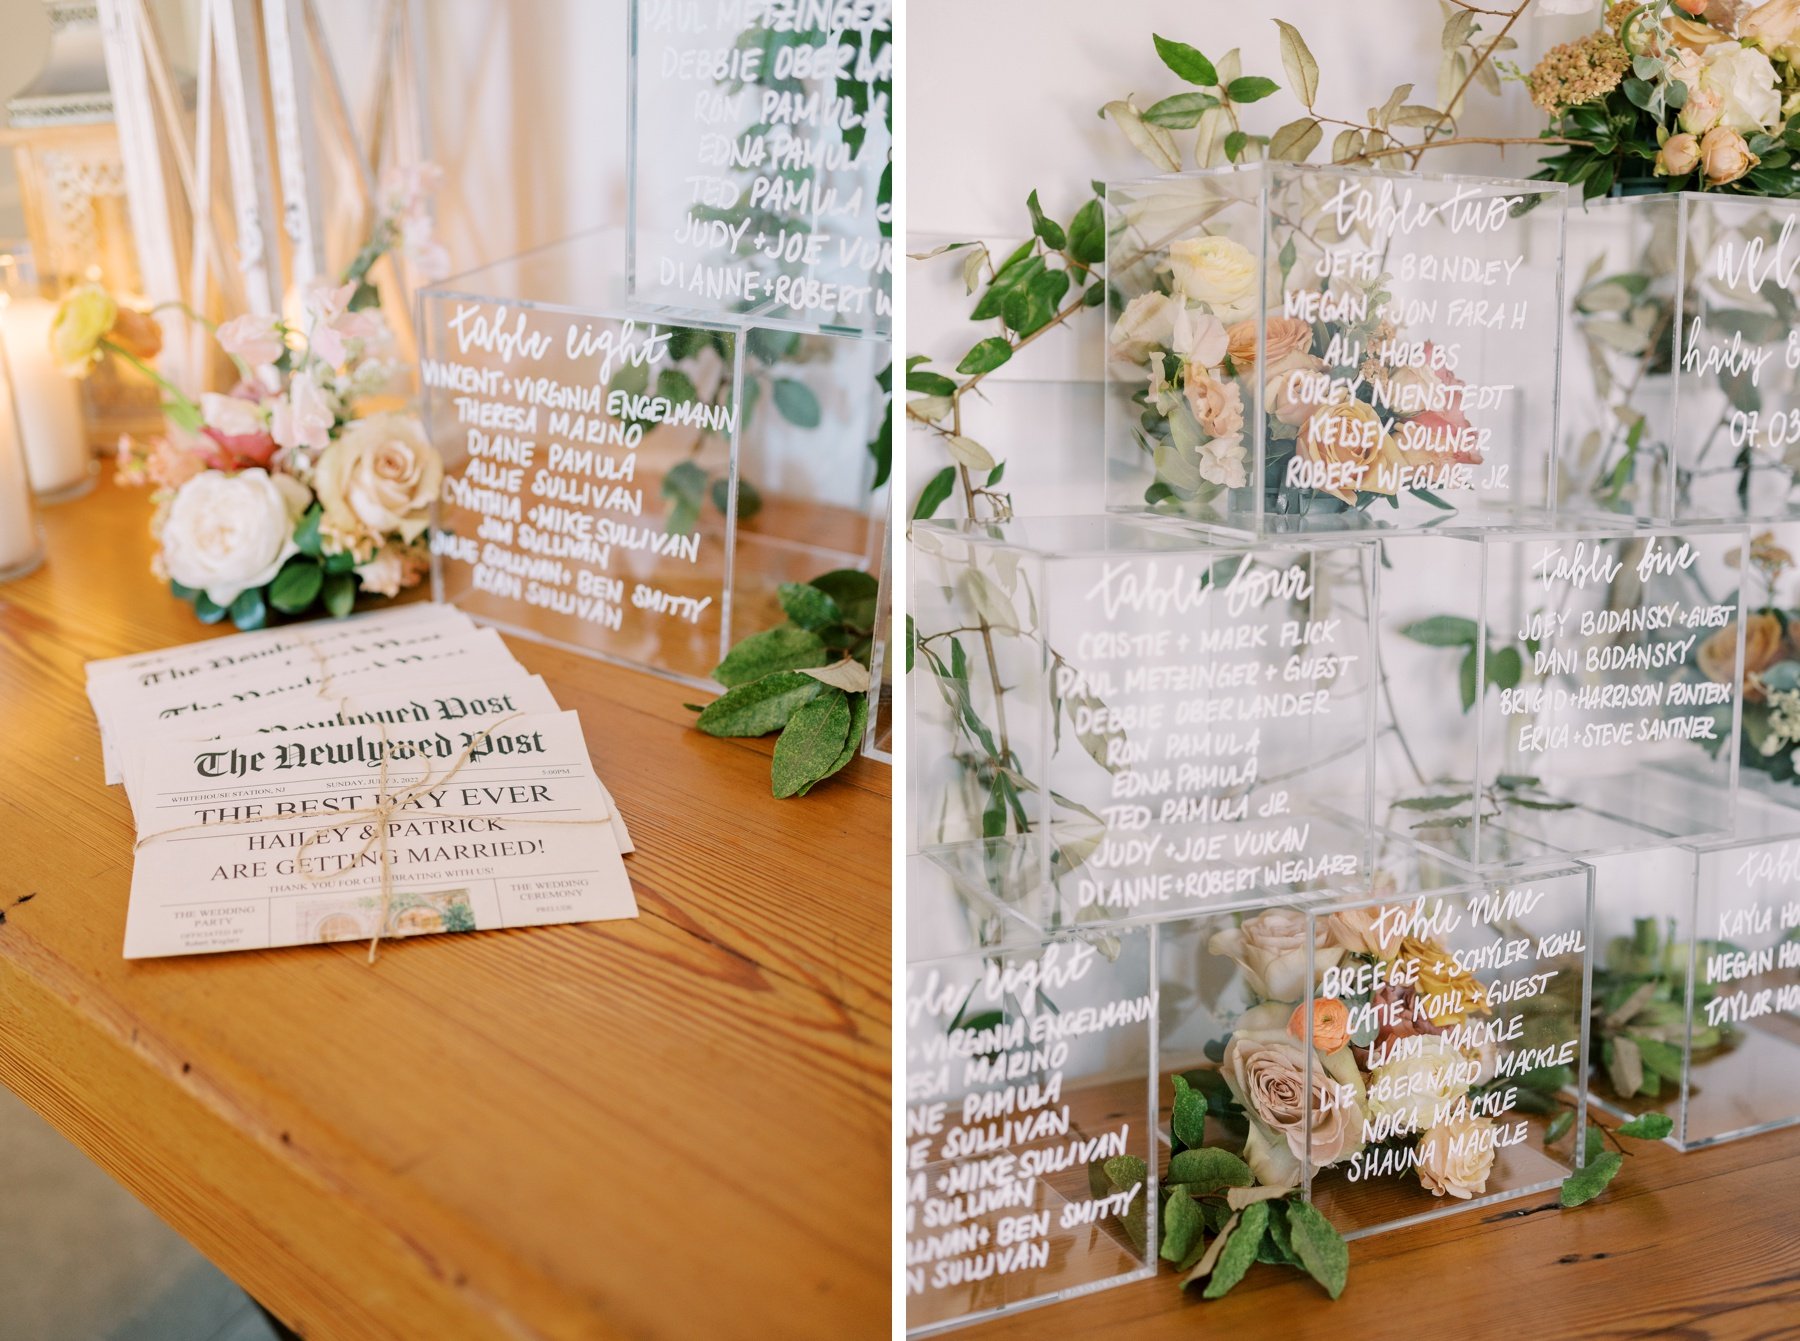 Acrylic box seating chart with orange and blush flowers at a wedding